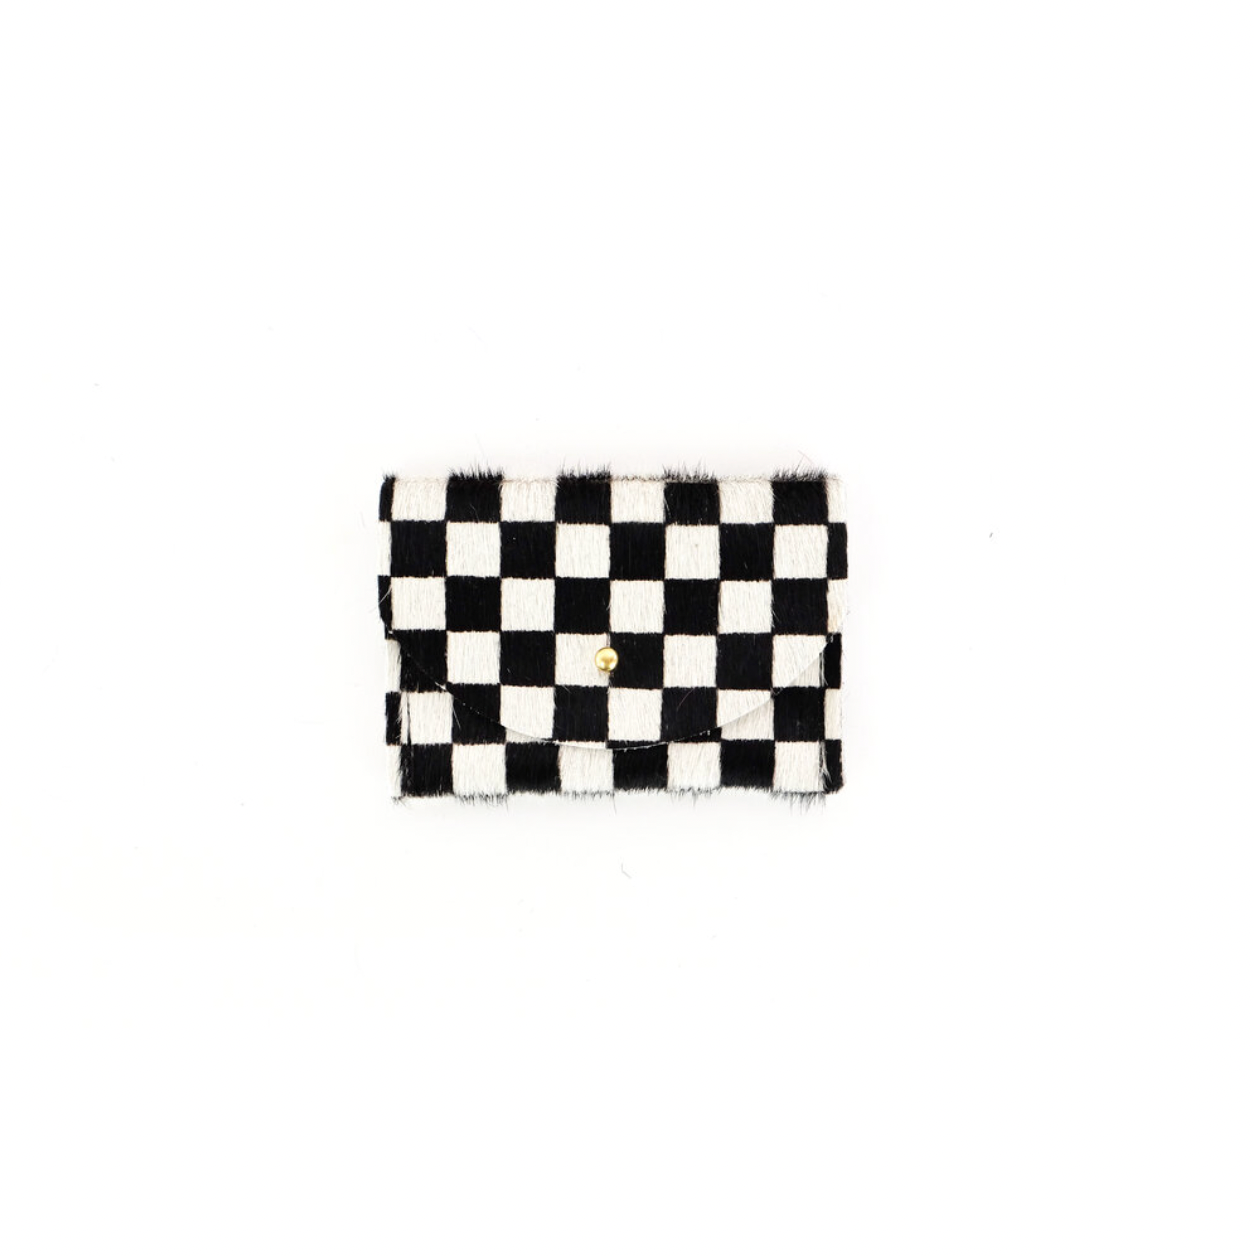 PRIMECUT: Checkered Leather Coin Pouch